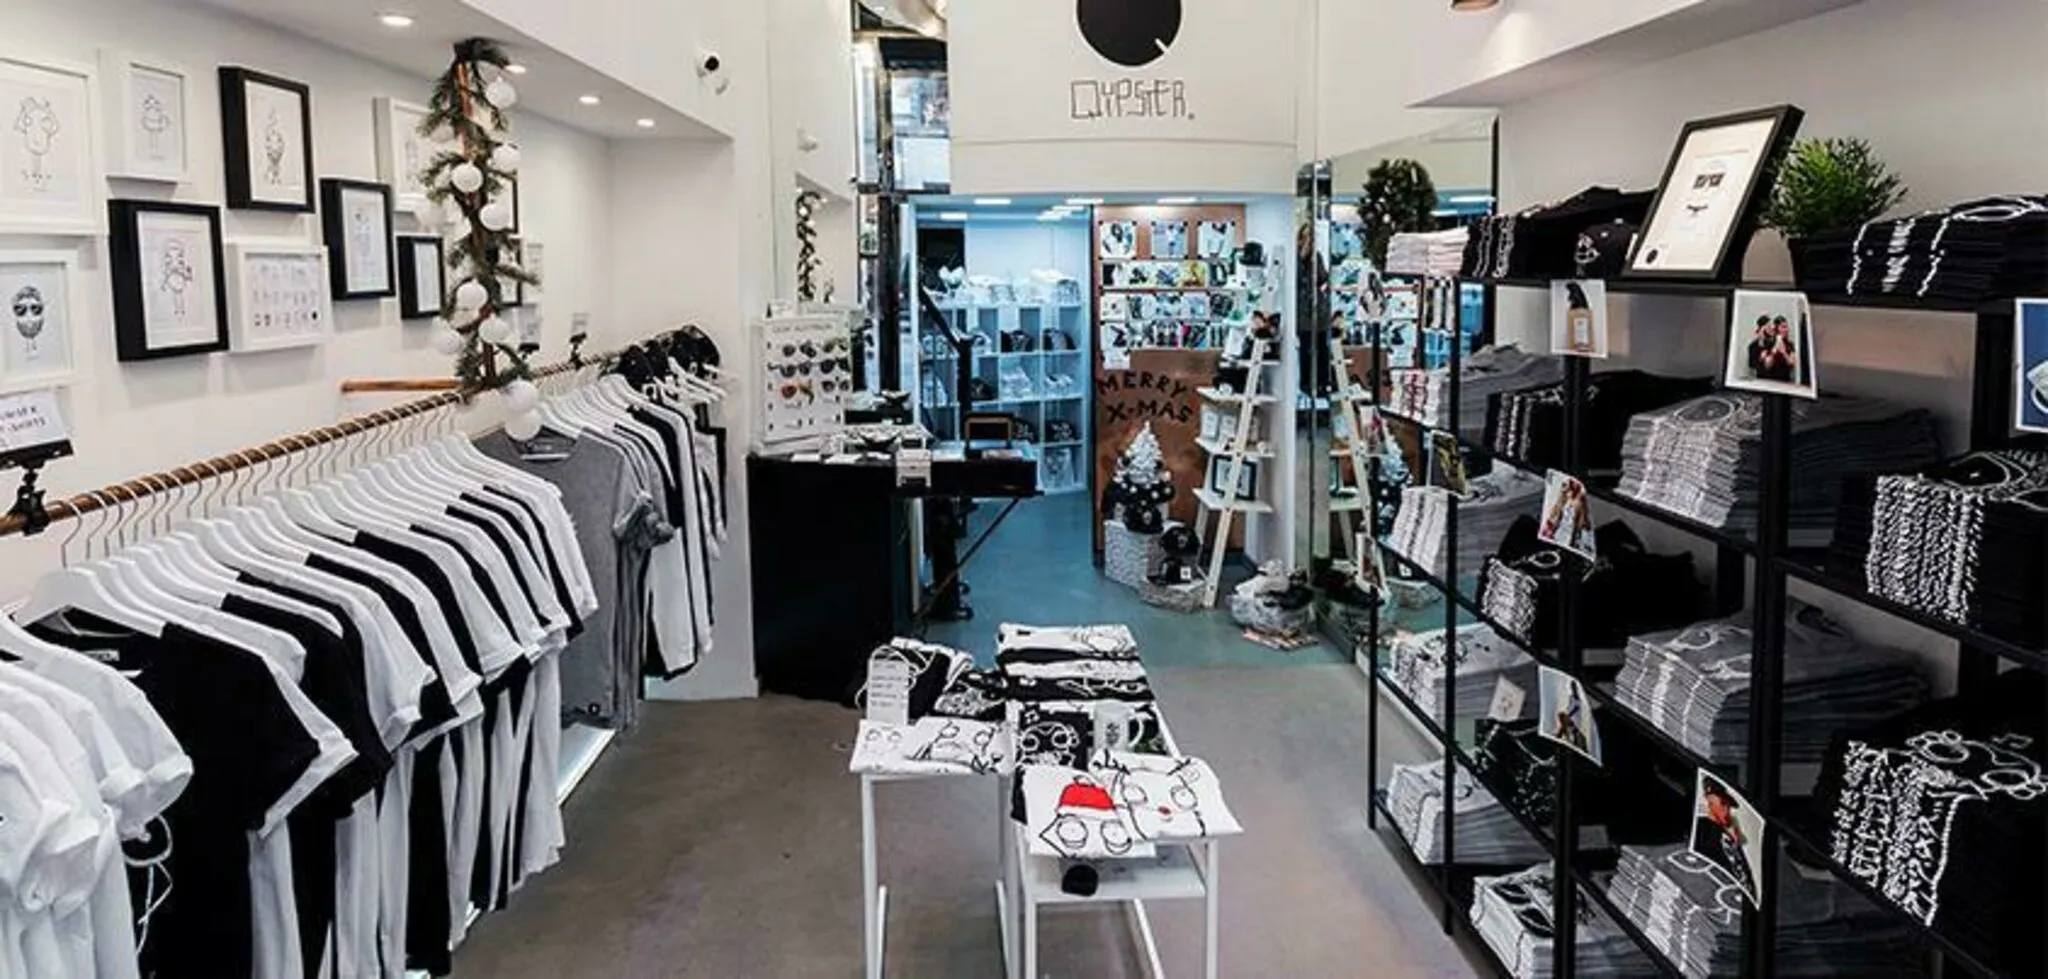 Quipster Flagship Store Salzburg in Austria, europe | Clothes - Country Helper